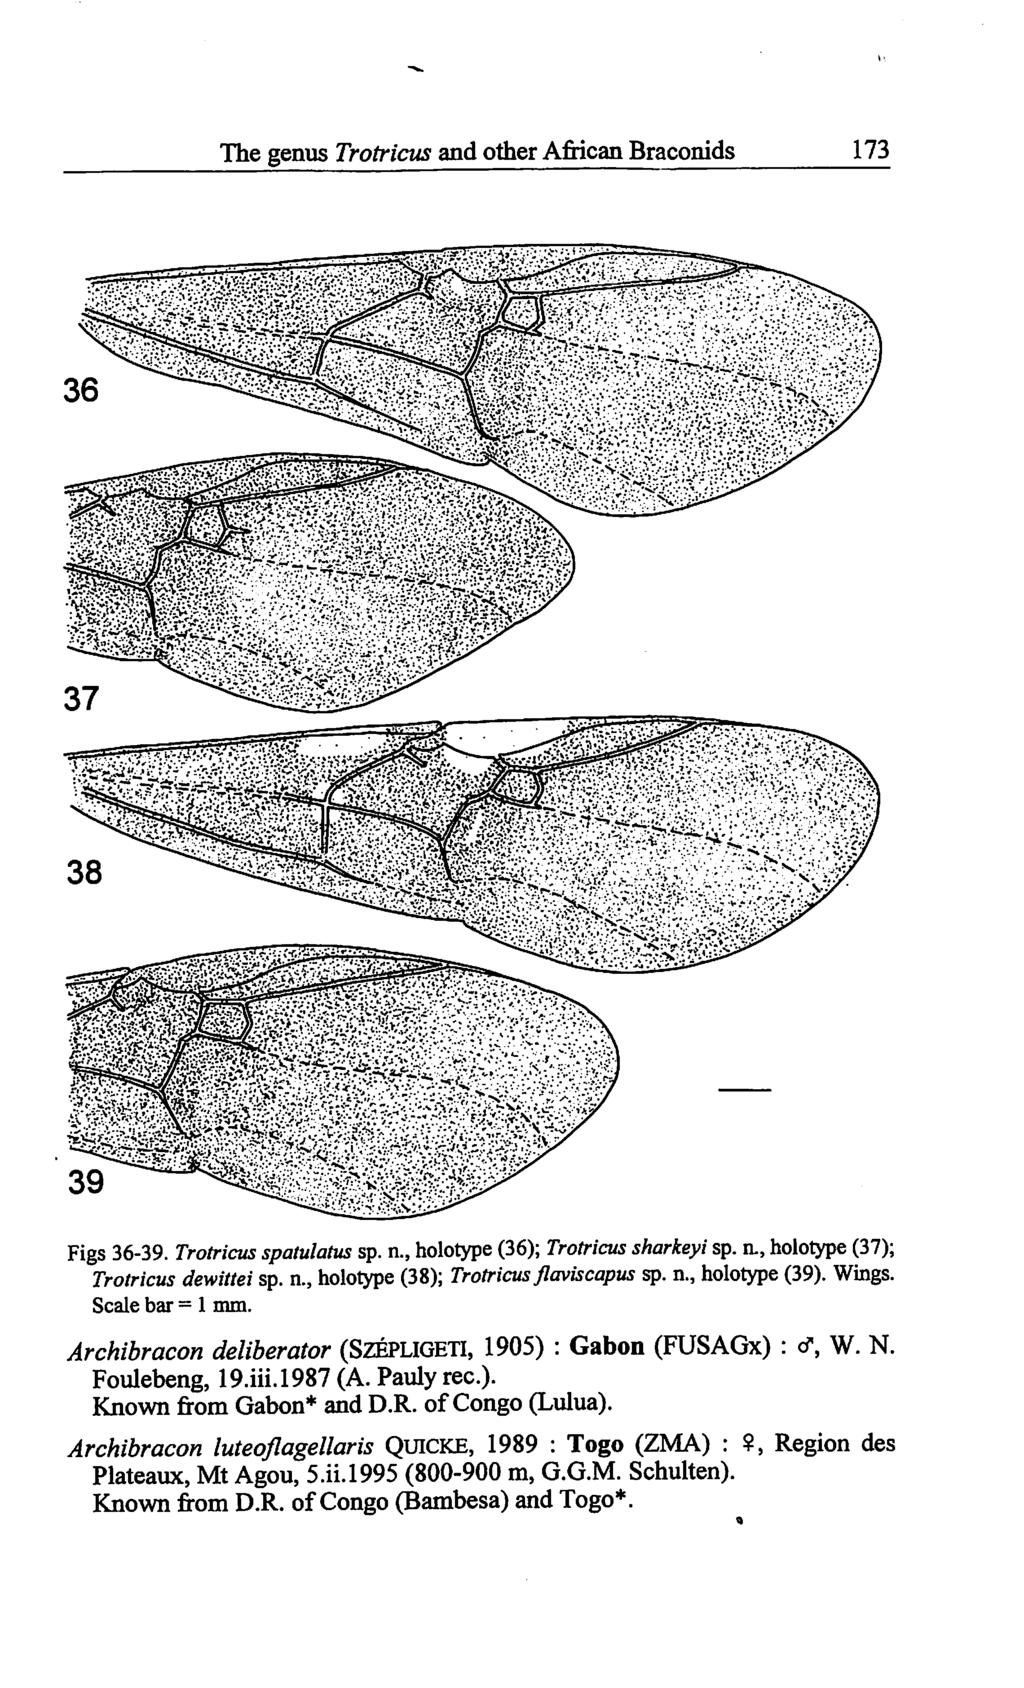 The genus Trotricus and other African Braconids 173 Figs 36-39. Trotricus spatulatus sp. n., holotype (36); Trotricus sharkeyi sp. n., holotype (37); Trotricus dewittei sp. n., holotype (38); Trotricus jlaviscapus sp.